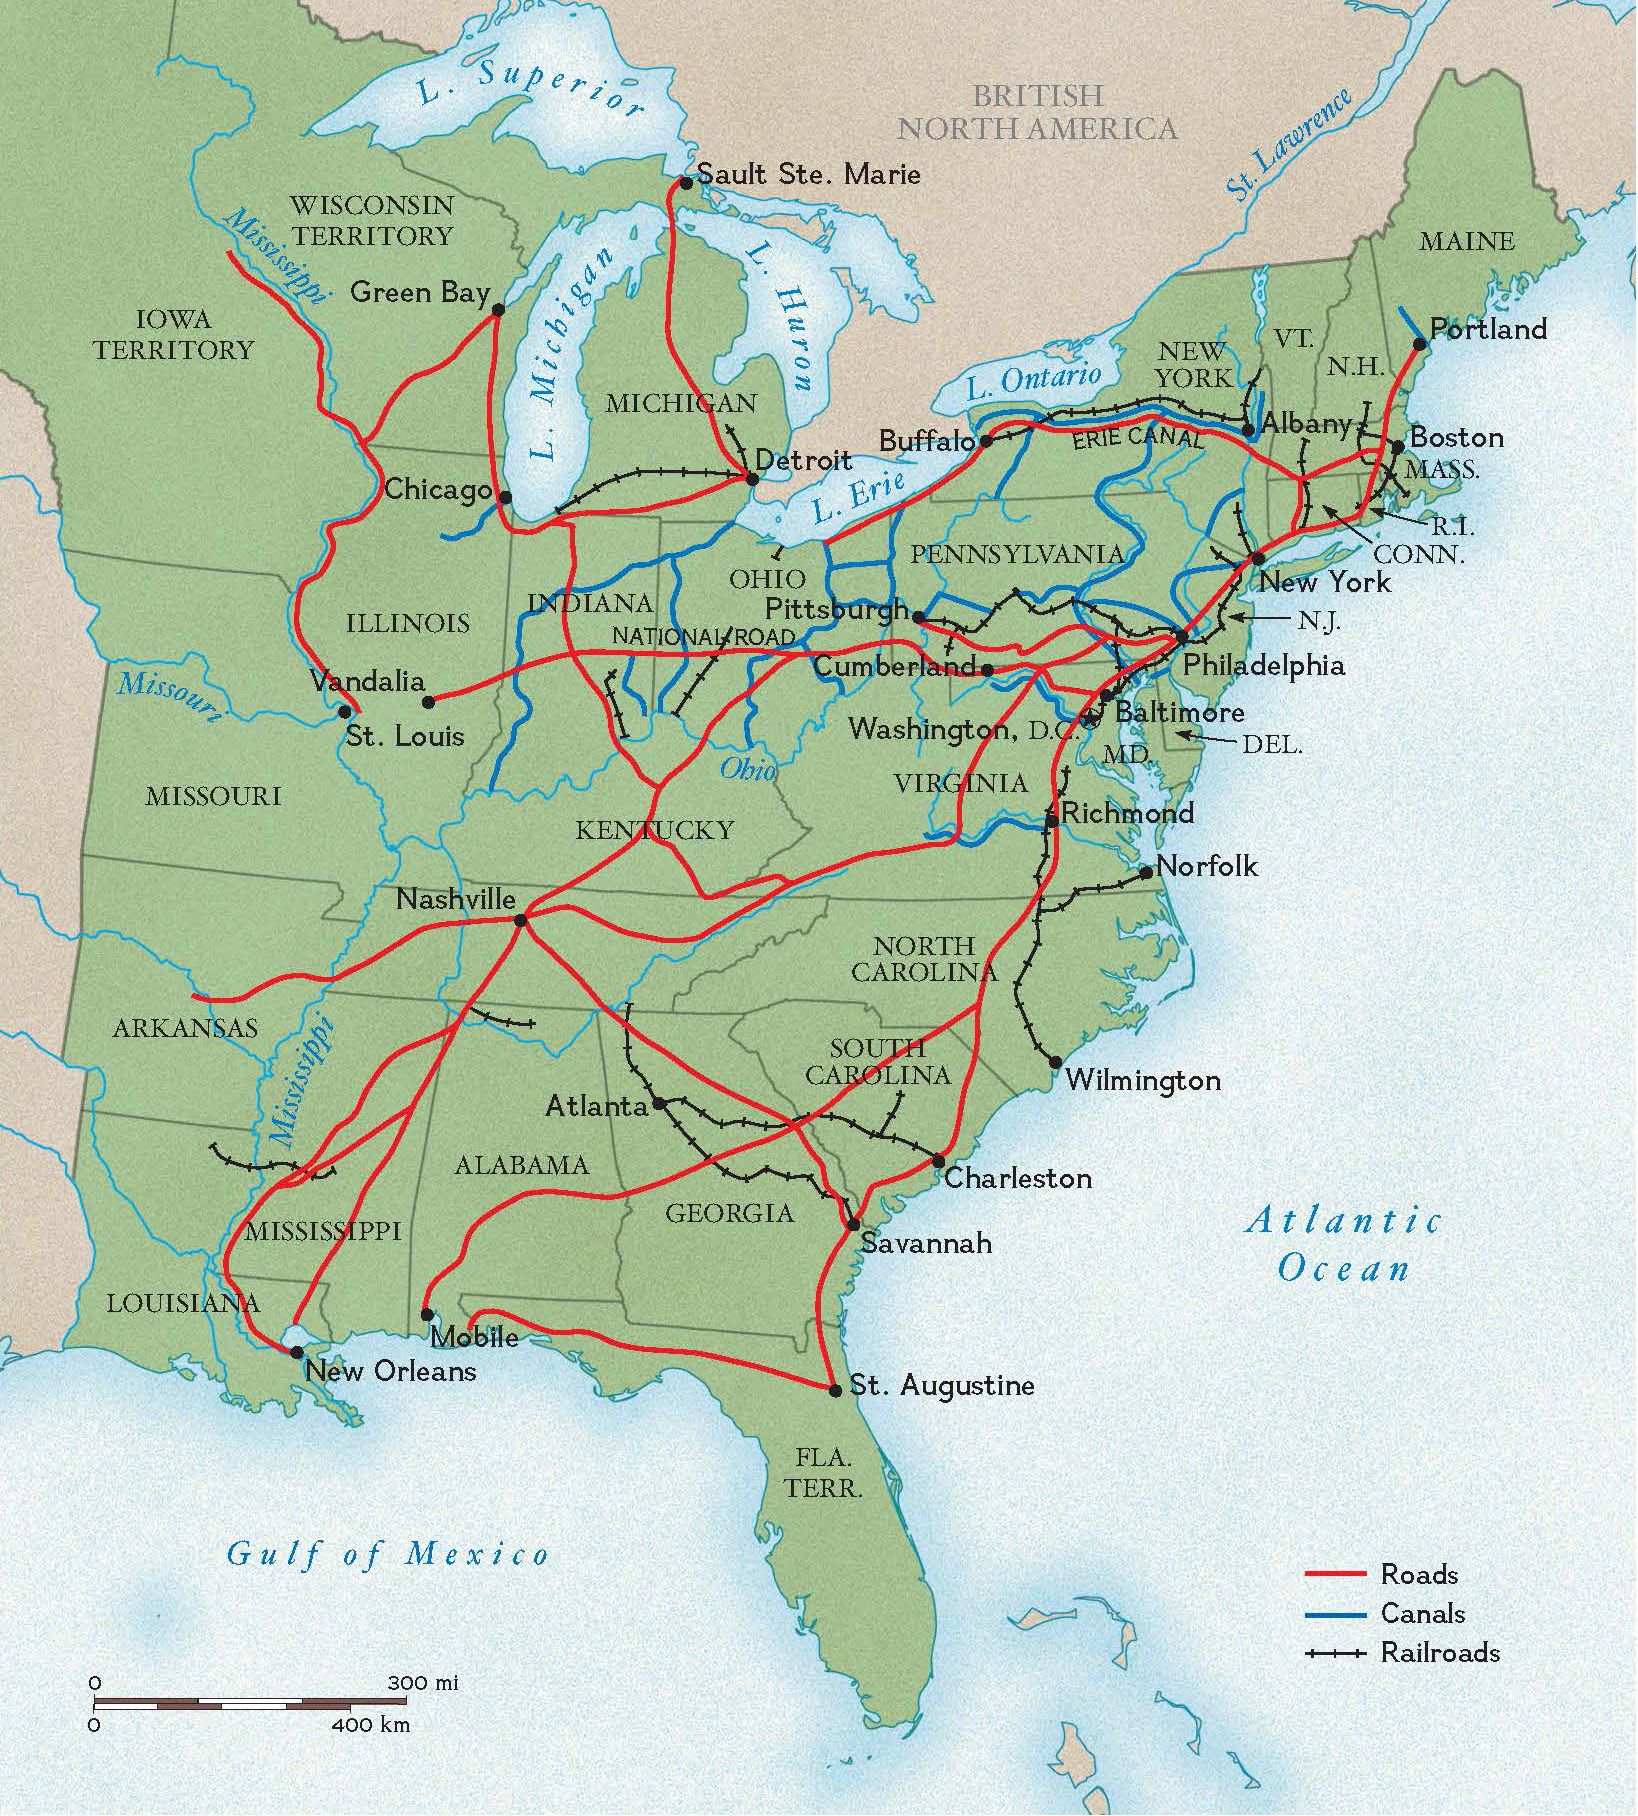 Roads, Canals, and Rails in the 1800s | National Geographic Society